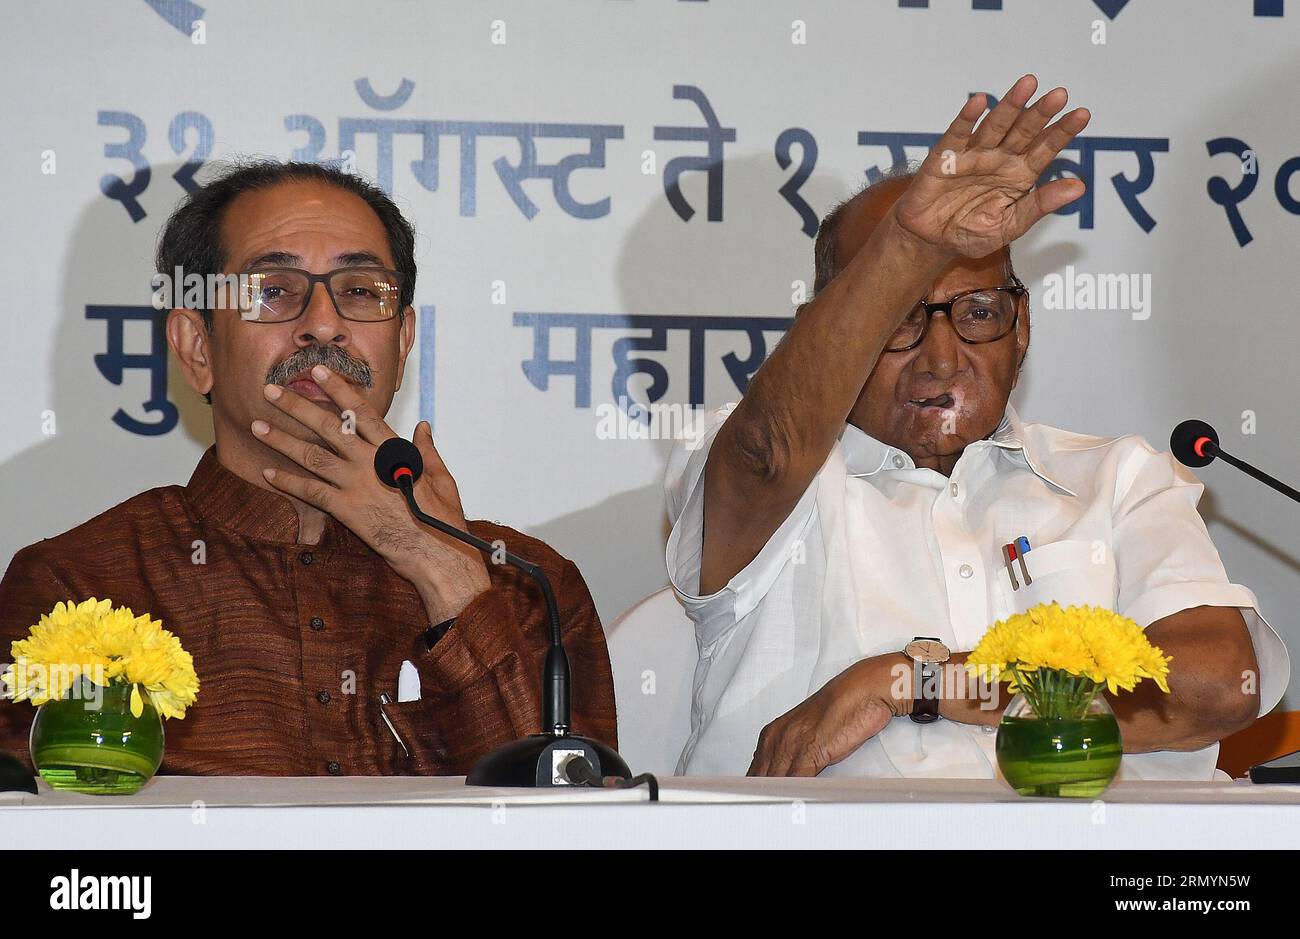 Mumbai, India. 30th Aug, 2023. L-R Shiv Sena (UBT) chief Uddhav Thackeray looks on as Nationalist Congress Party (NCP) chief Sharad Govindrao Pawar gestures with his hand during the Maha Vikas Aghadi (MVA) press conference in Mumbai. The press conference was held ahead of Indian National Developmental Inclusive Alliance (INDIA) third meeting to be held on 31st August and 1st September 2023. (Photo by Ashish Vaishnav/SOPA Images/Sipa USA) Credit: Sipa USA/Alamy Live News Stock Photo